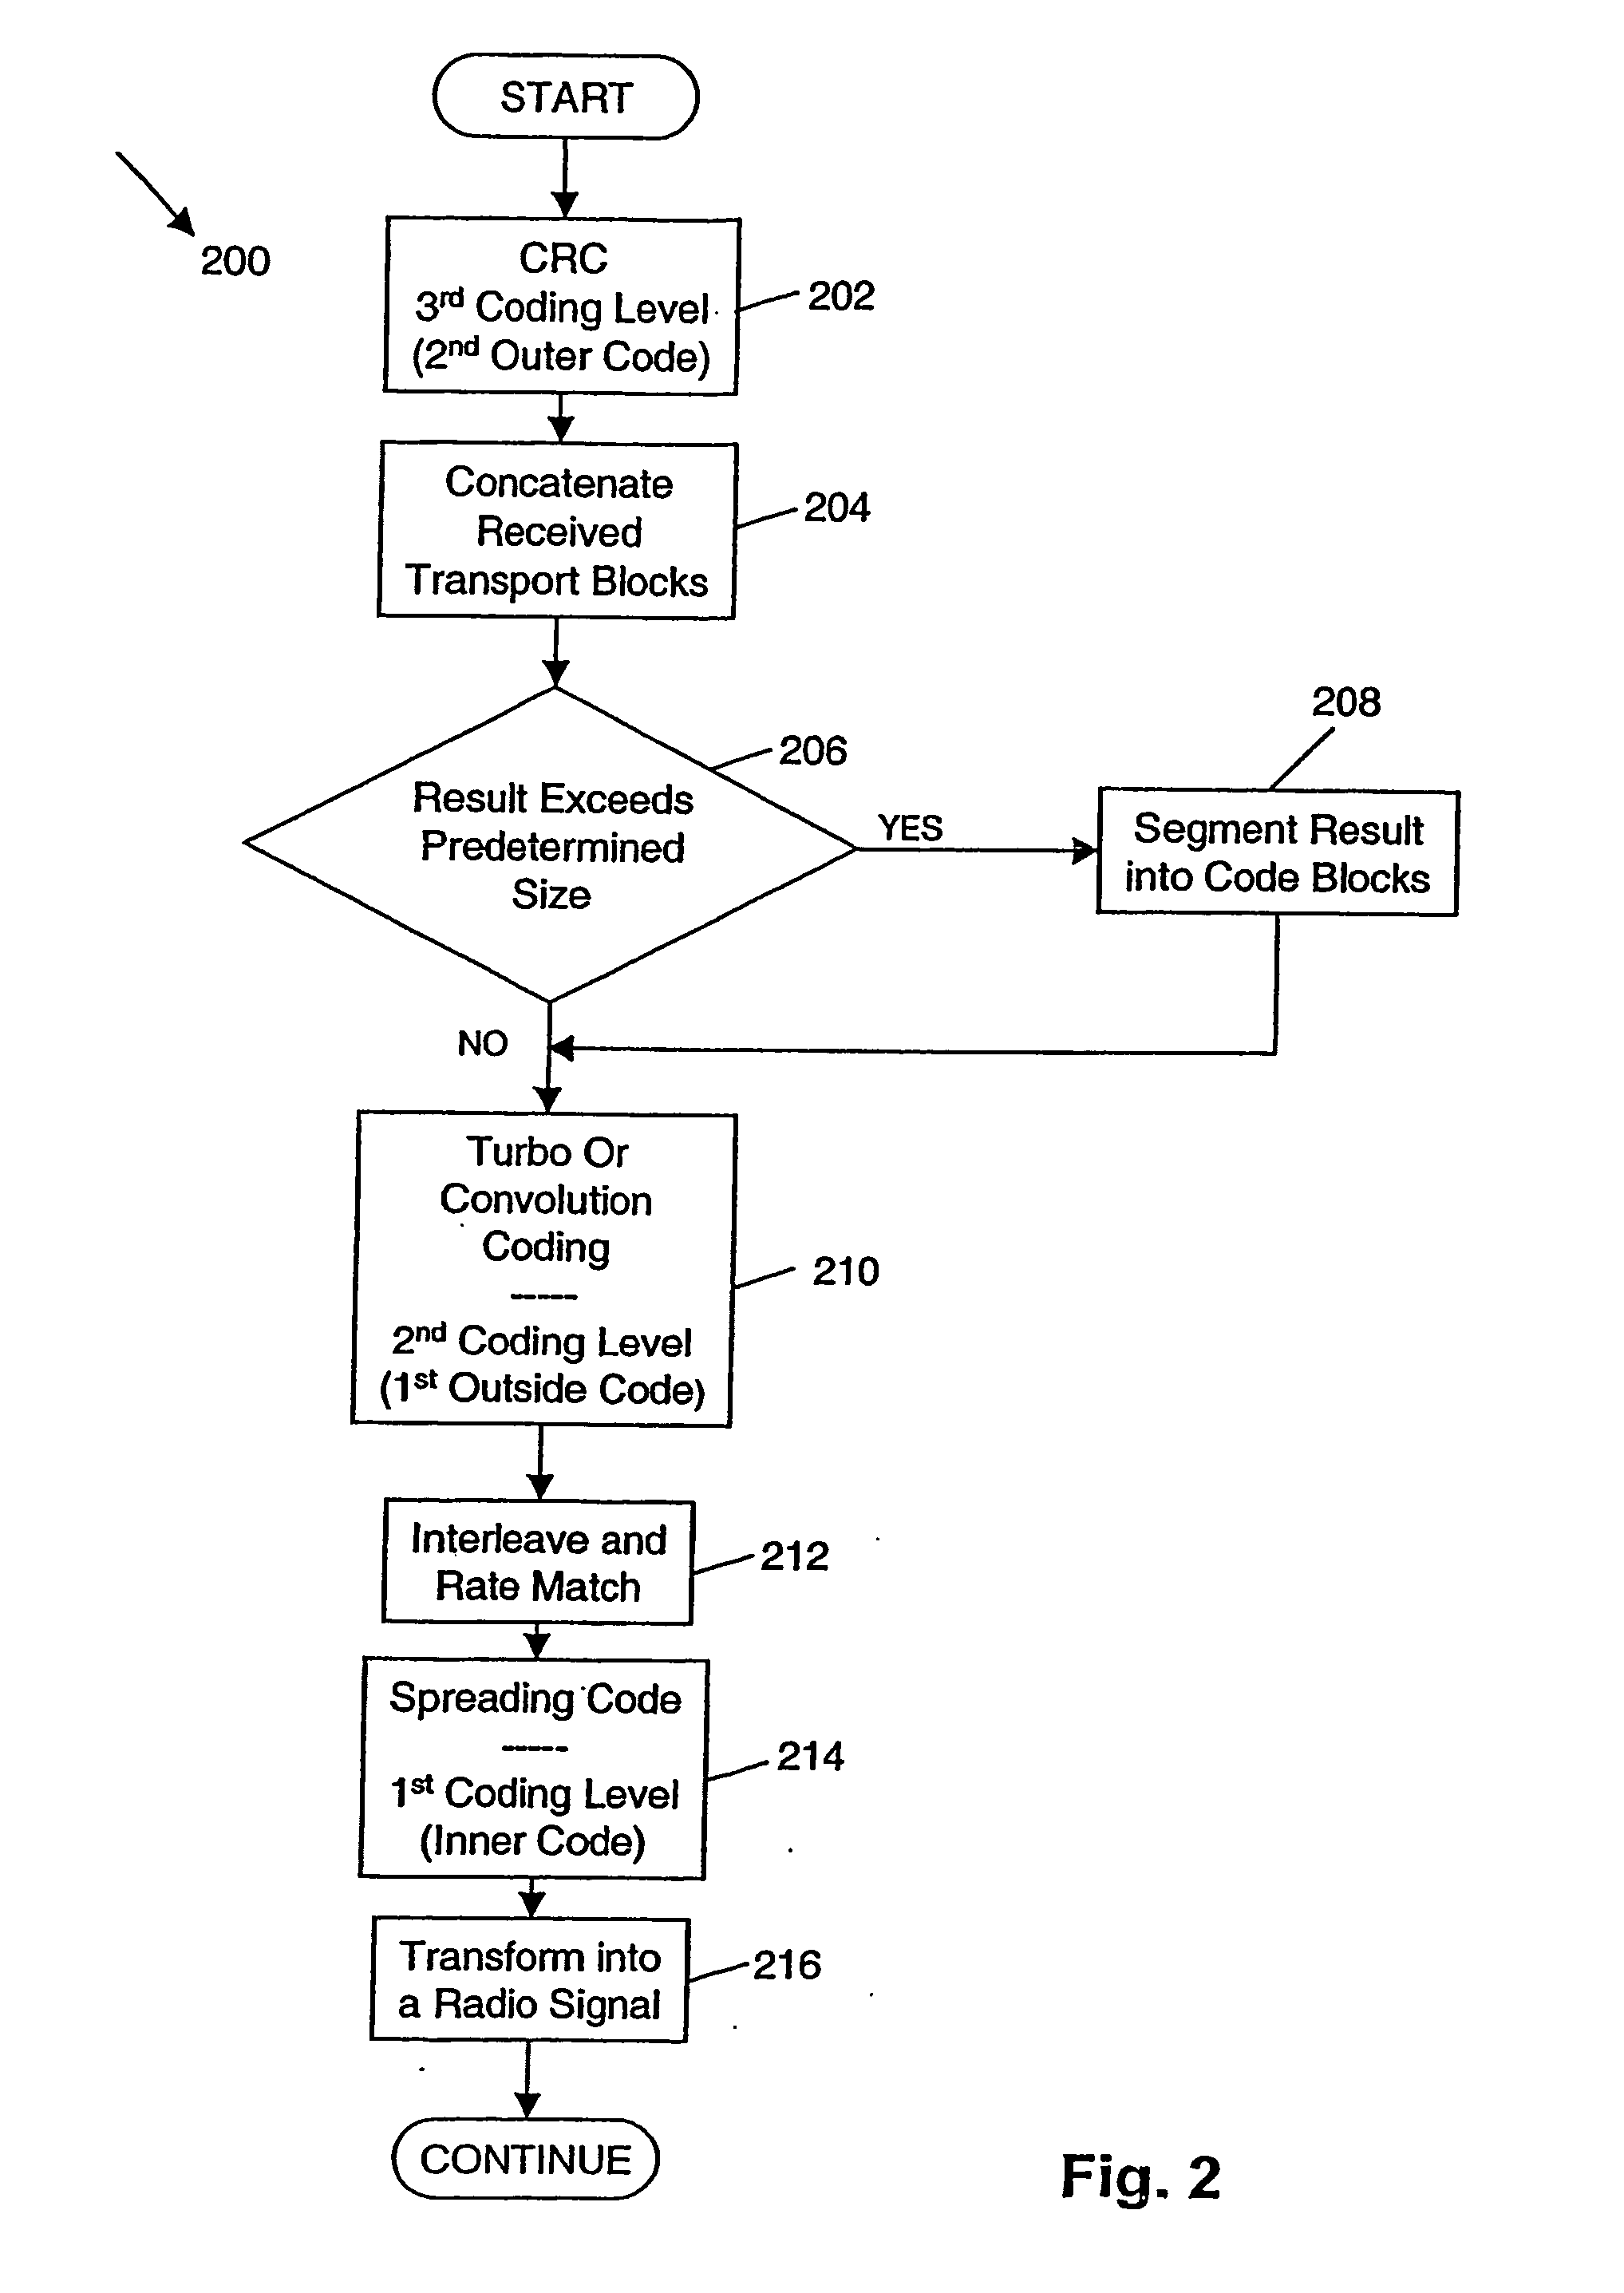 Method and apparatus for performing inter-frequency and inter-rat handover measurements in mbms